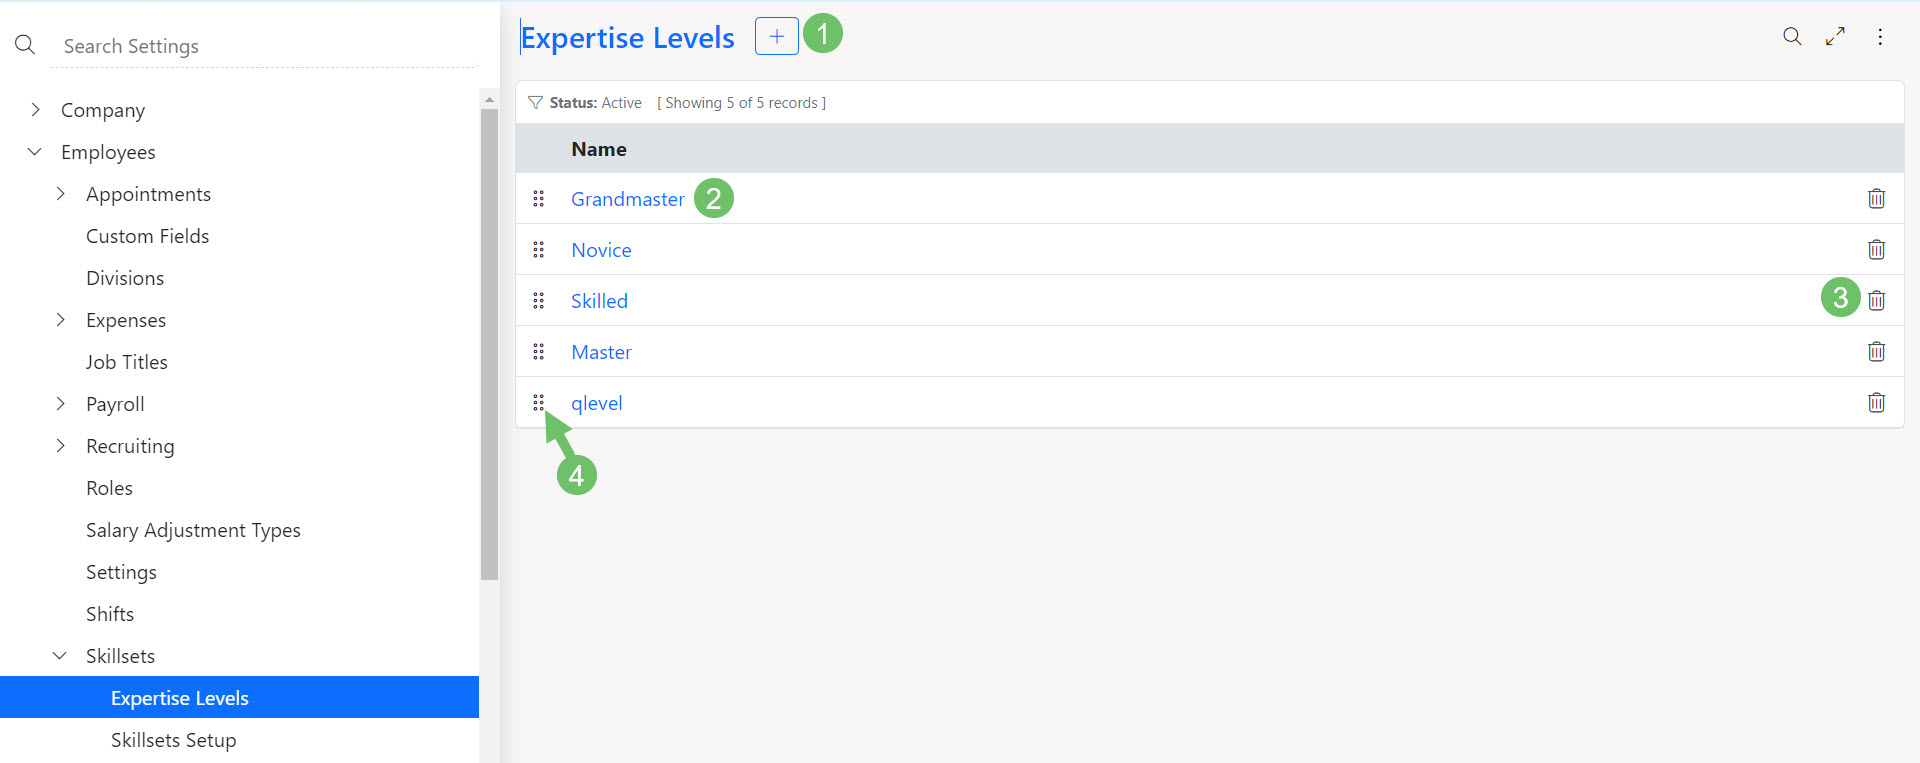 Expertise Levels page within the Employee Settings in Striven